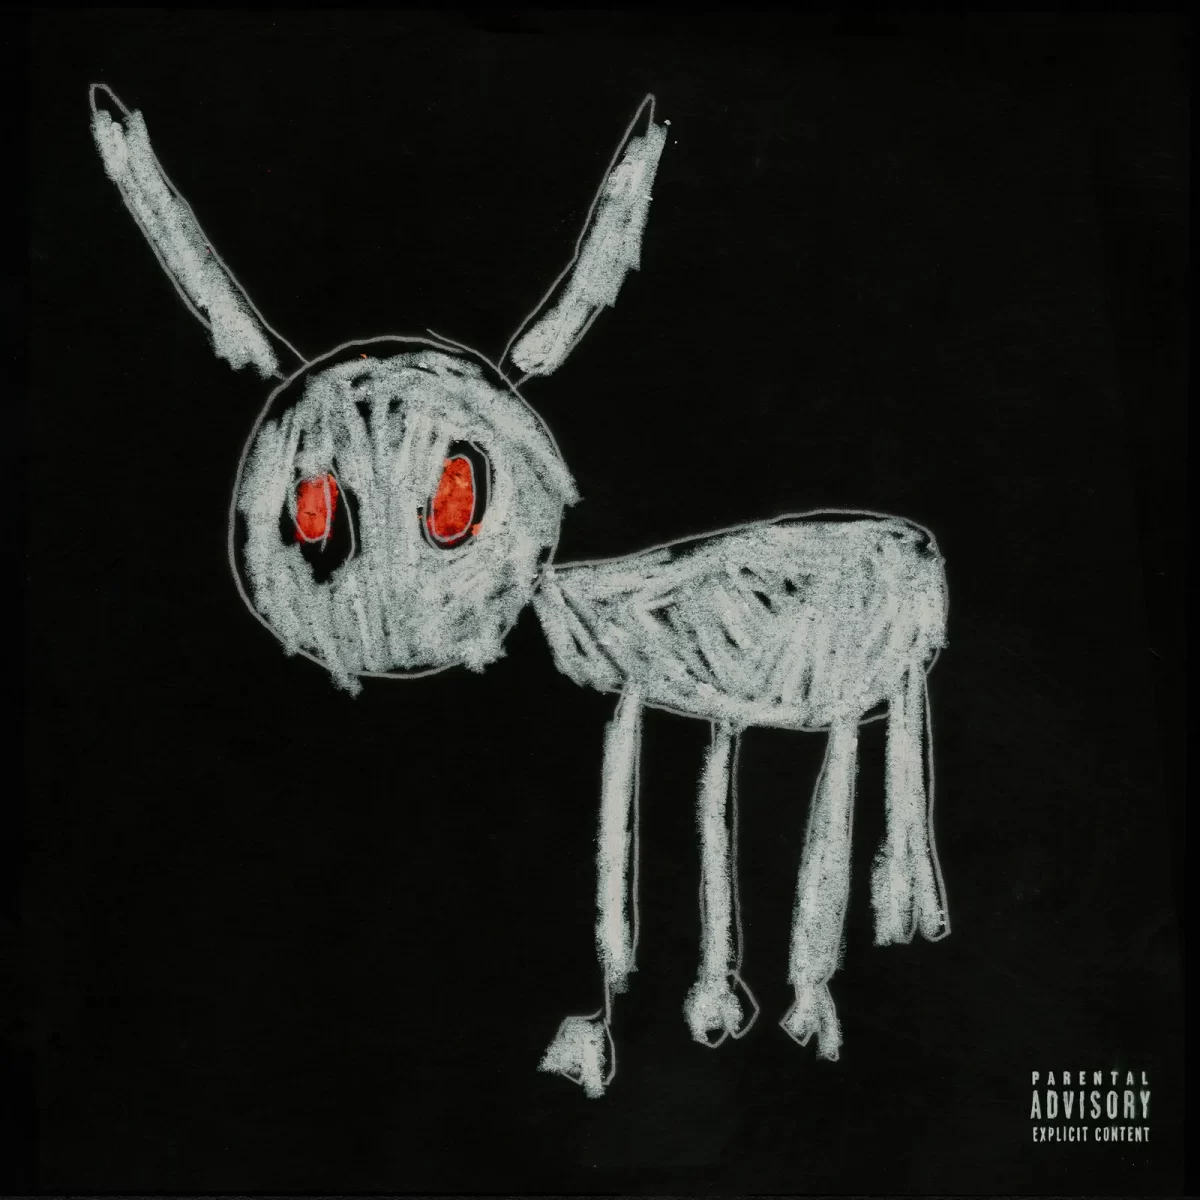 The+album+cover+for+For+All+The+Dogs+by+Drake+features+a+simple+yet+endearing+drawing+of+a+white+dog+with+red-orange+eyes%2C+which+was+created+by+his+5-year-old+son%2C+Adonis.+Drake+shared+this+artwork+with+his+fans+on+Instagram%2C+sparking+a+warm+reception.+It+not+only+encapsulates+the+albums+title+but+also+showcases+a+personal+touch+from+his+son.